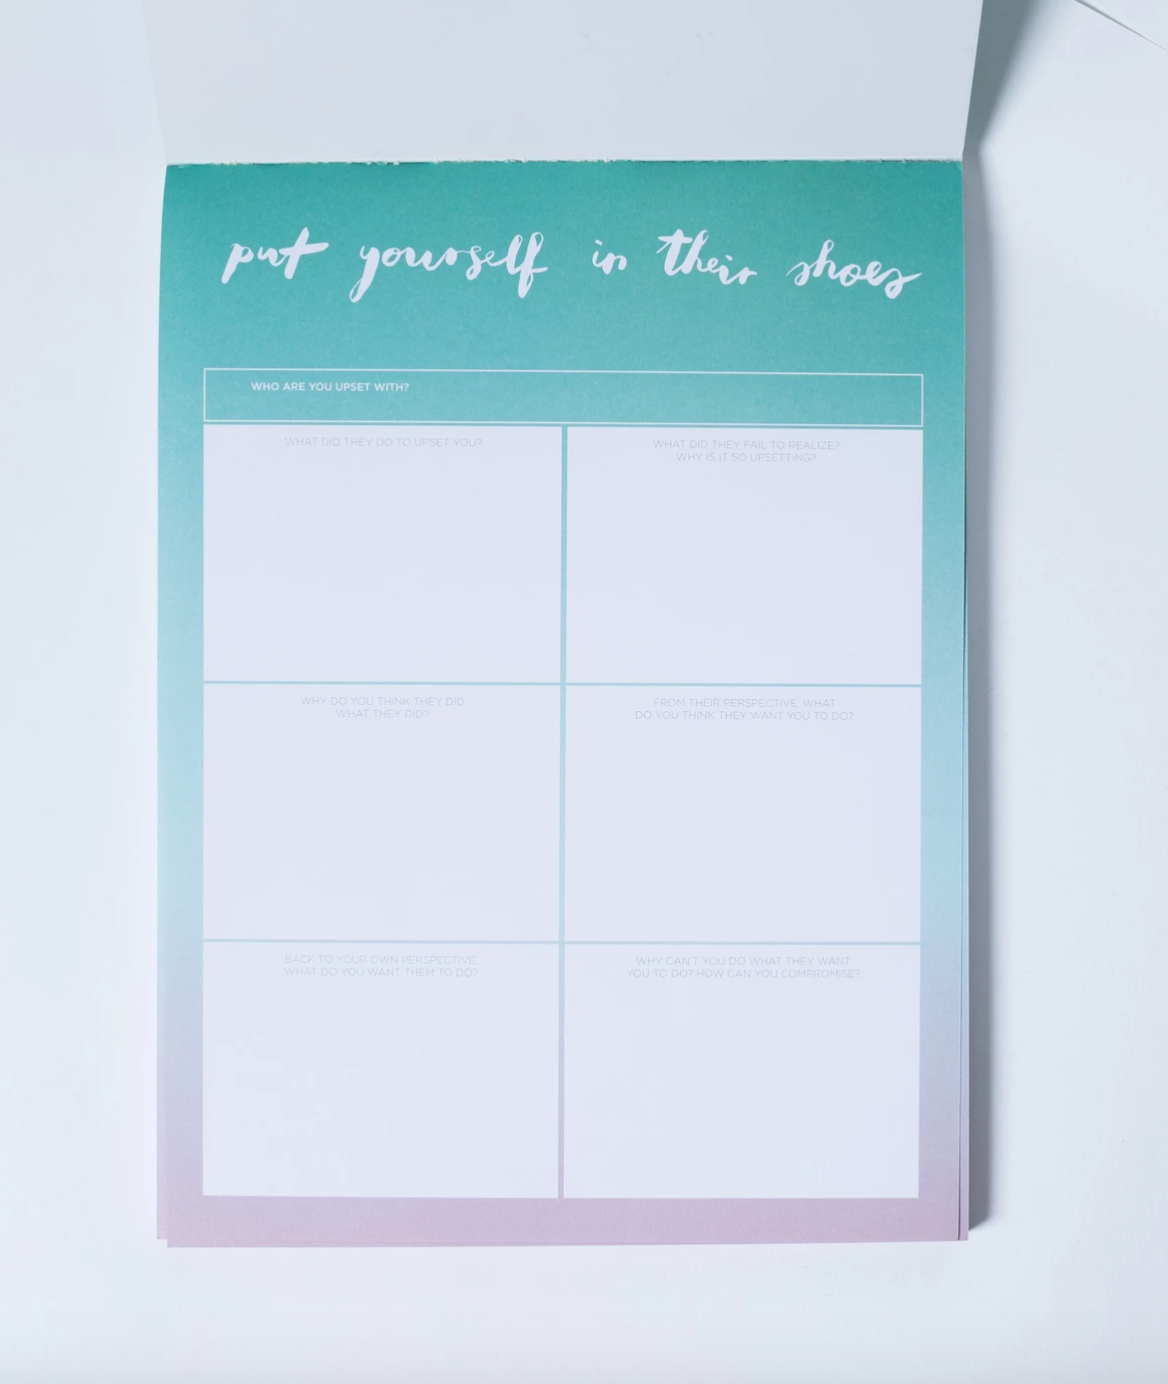 The Happiness Planner - "PUT YOURSELF IN THEIR SHOES" NOTEPAD